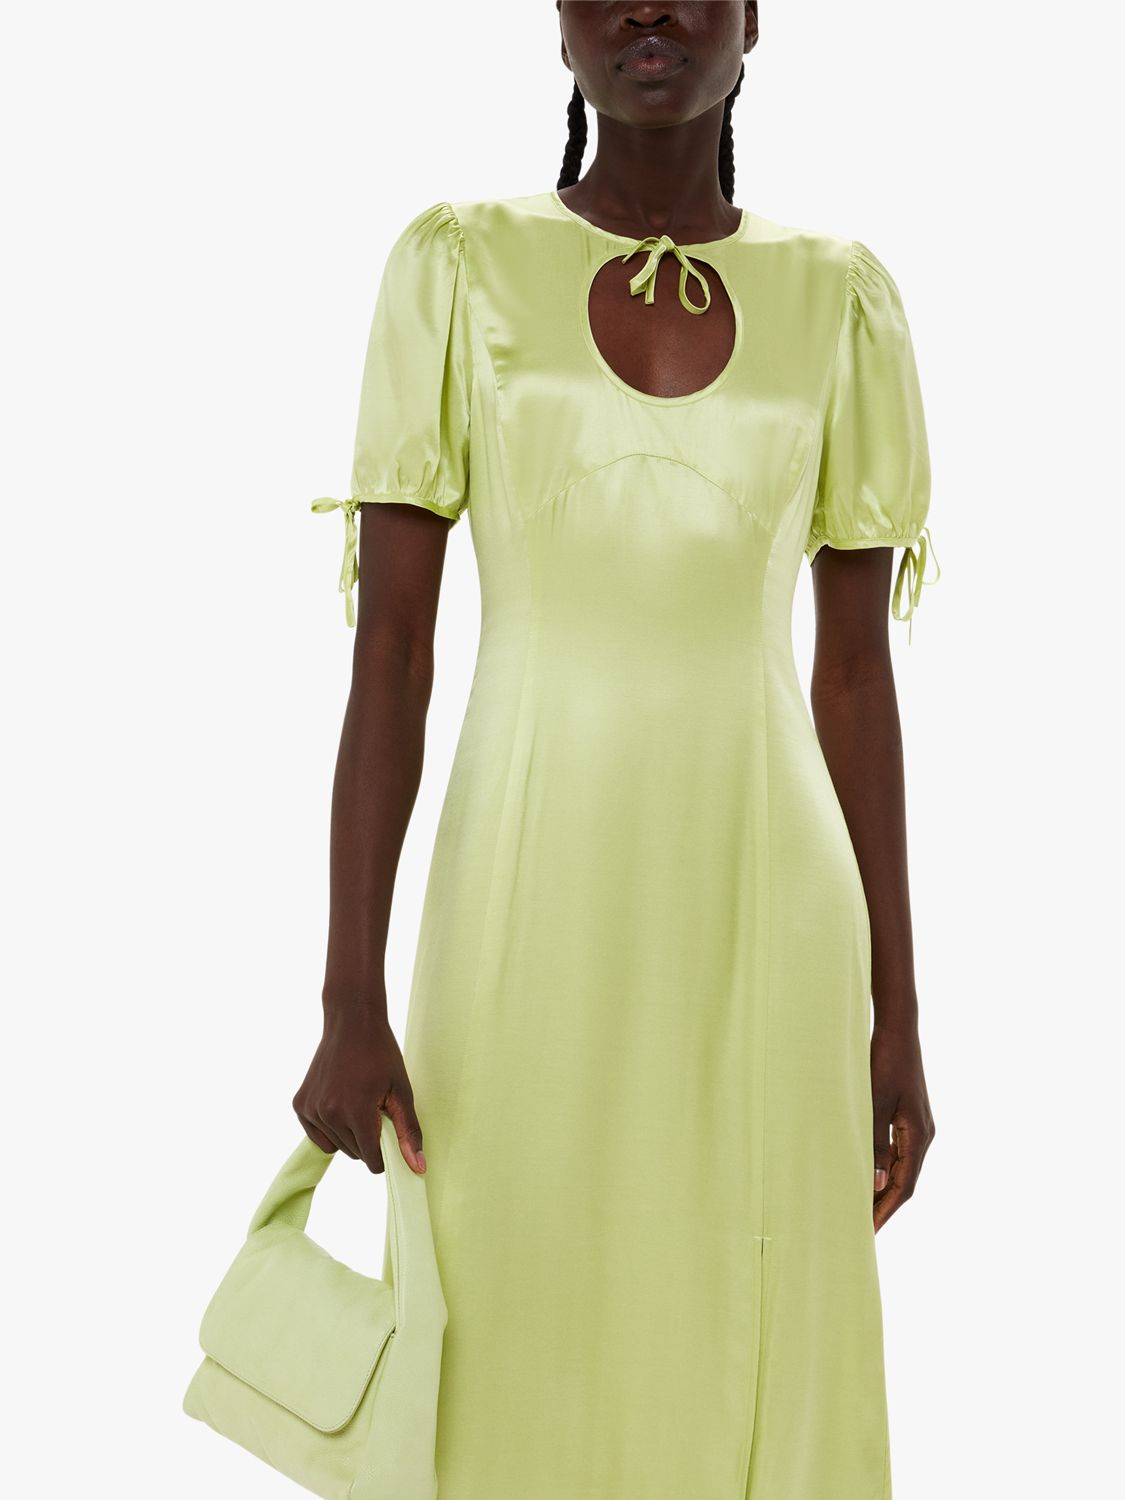 Buy Whistles Brooke Puffy Leather Mini Bag, Lime Online at johnlewis.com